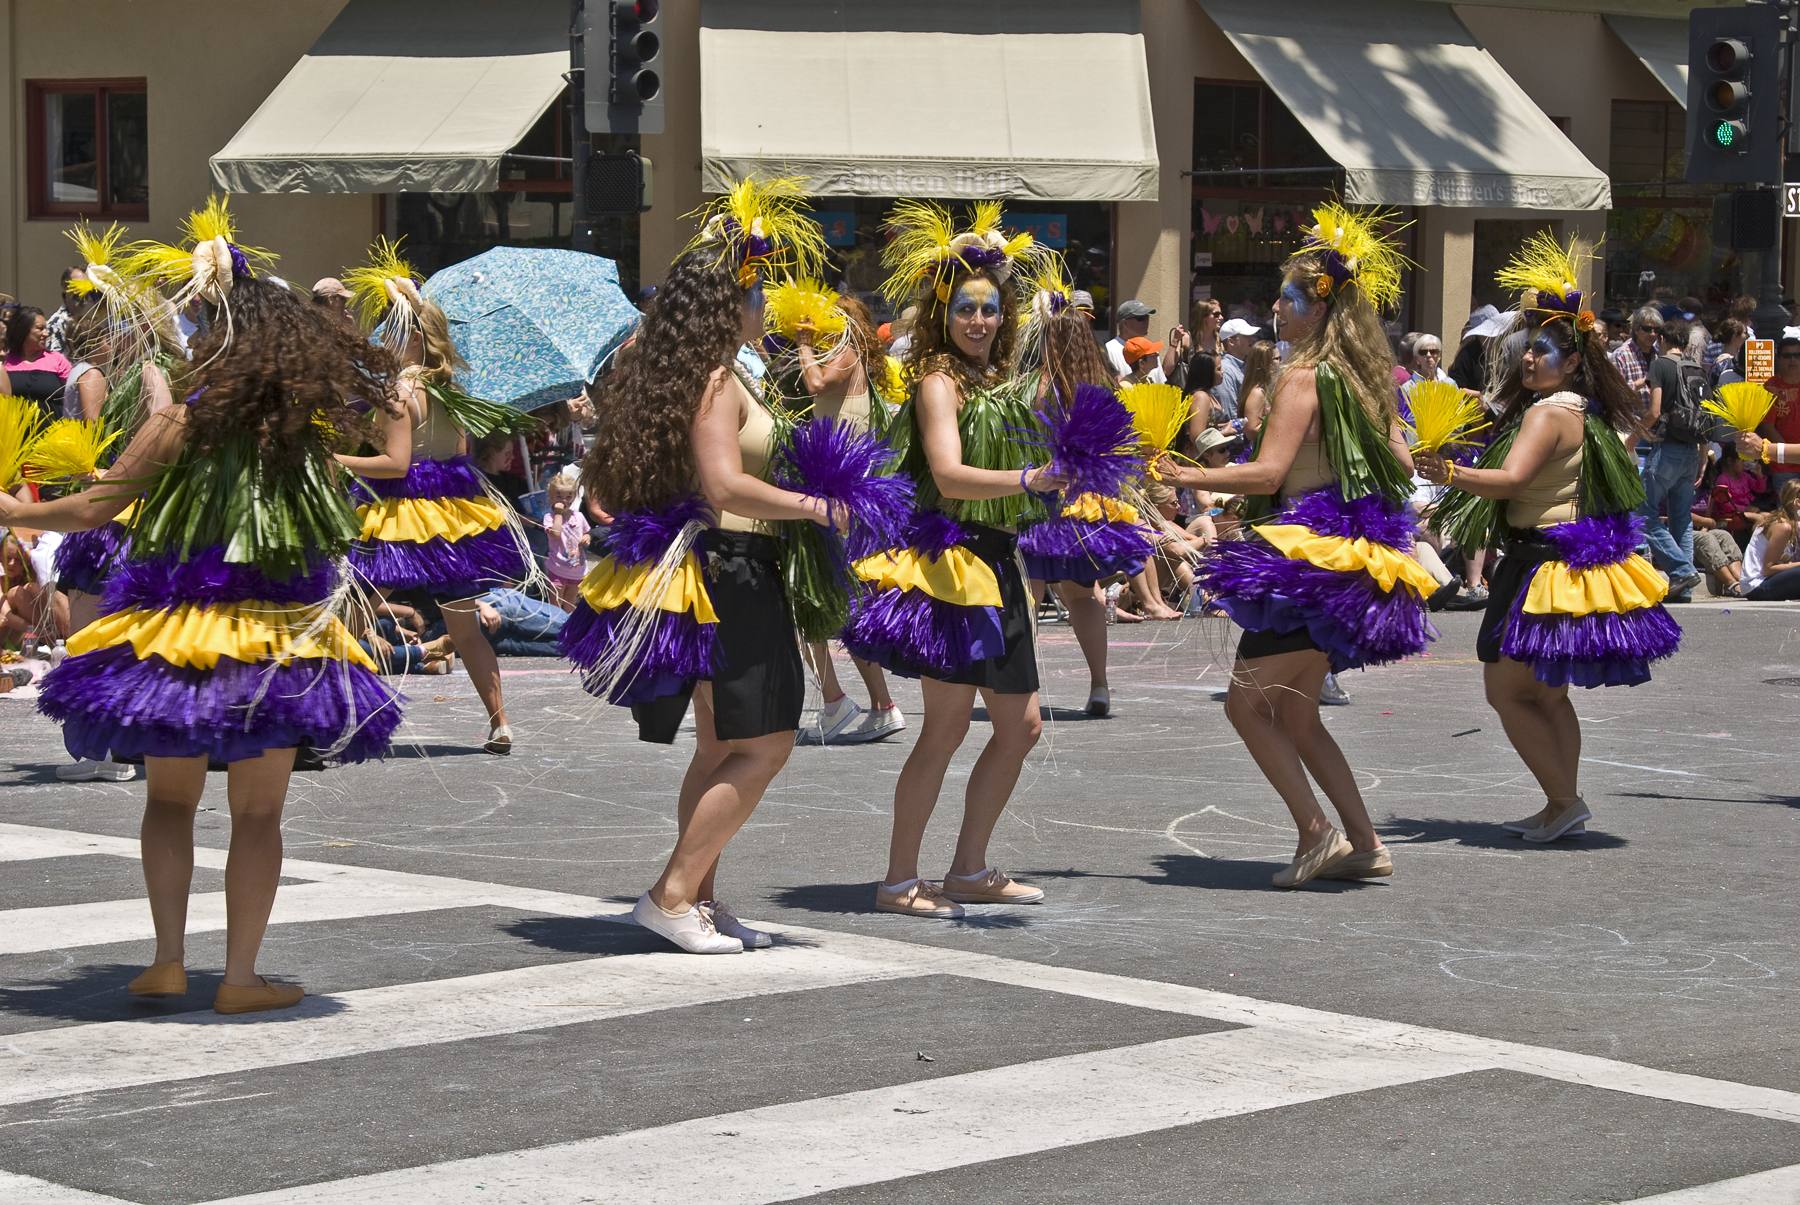 a group of women are dressed in purple and yellow outfits